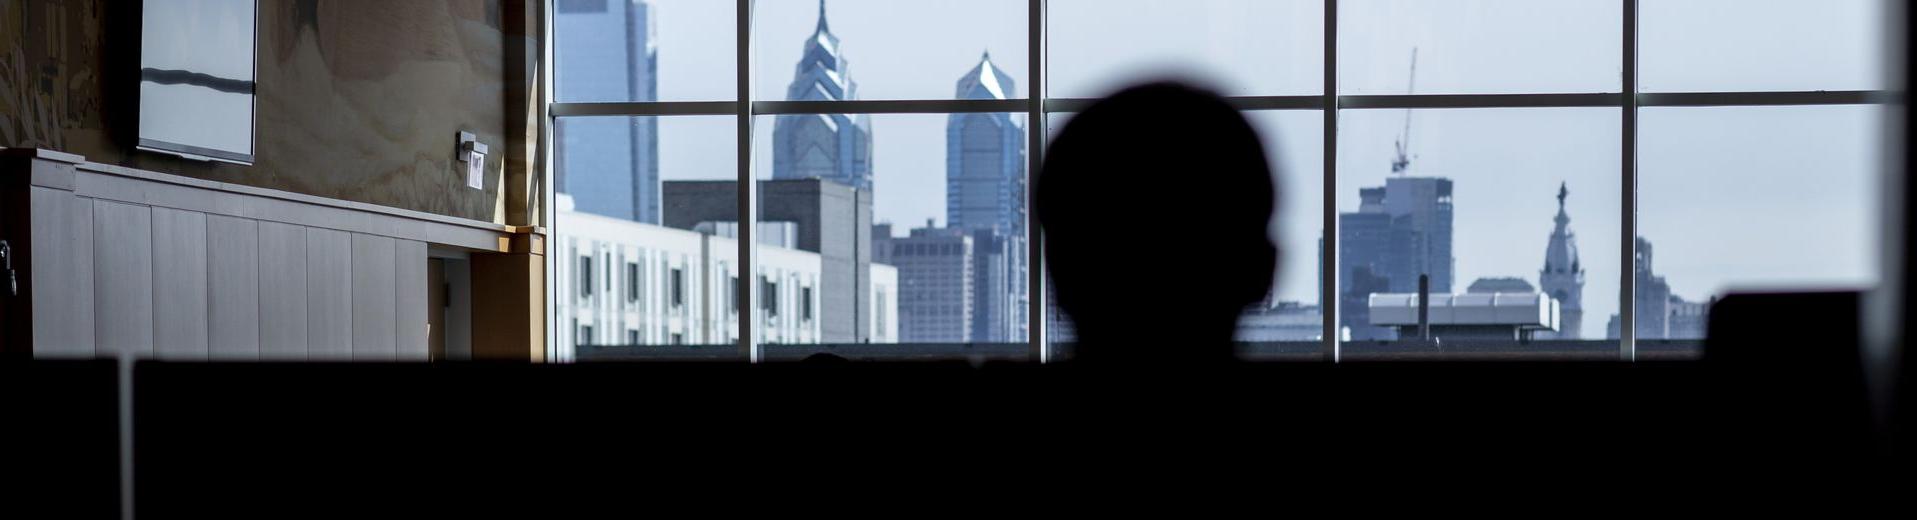 A student looks at the Philadelphia skyline through the windows of a building at 亿德体育.